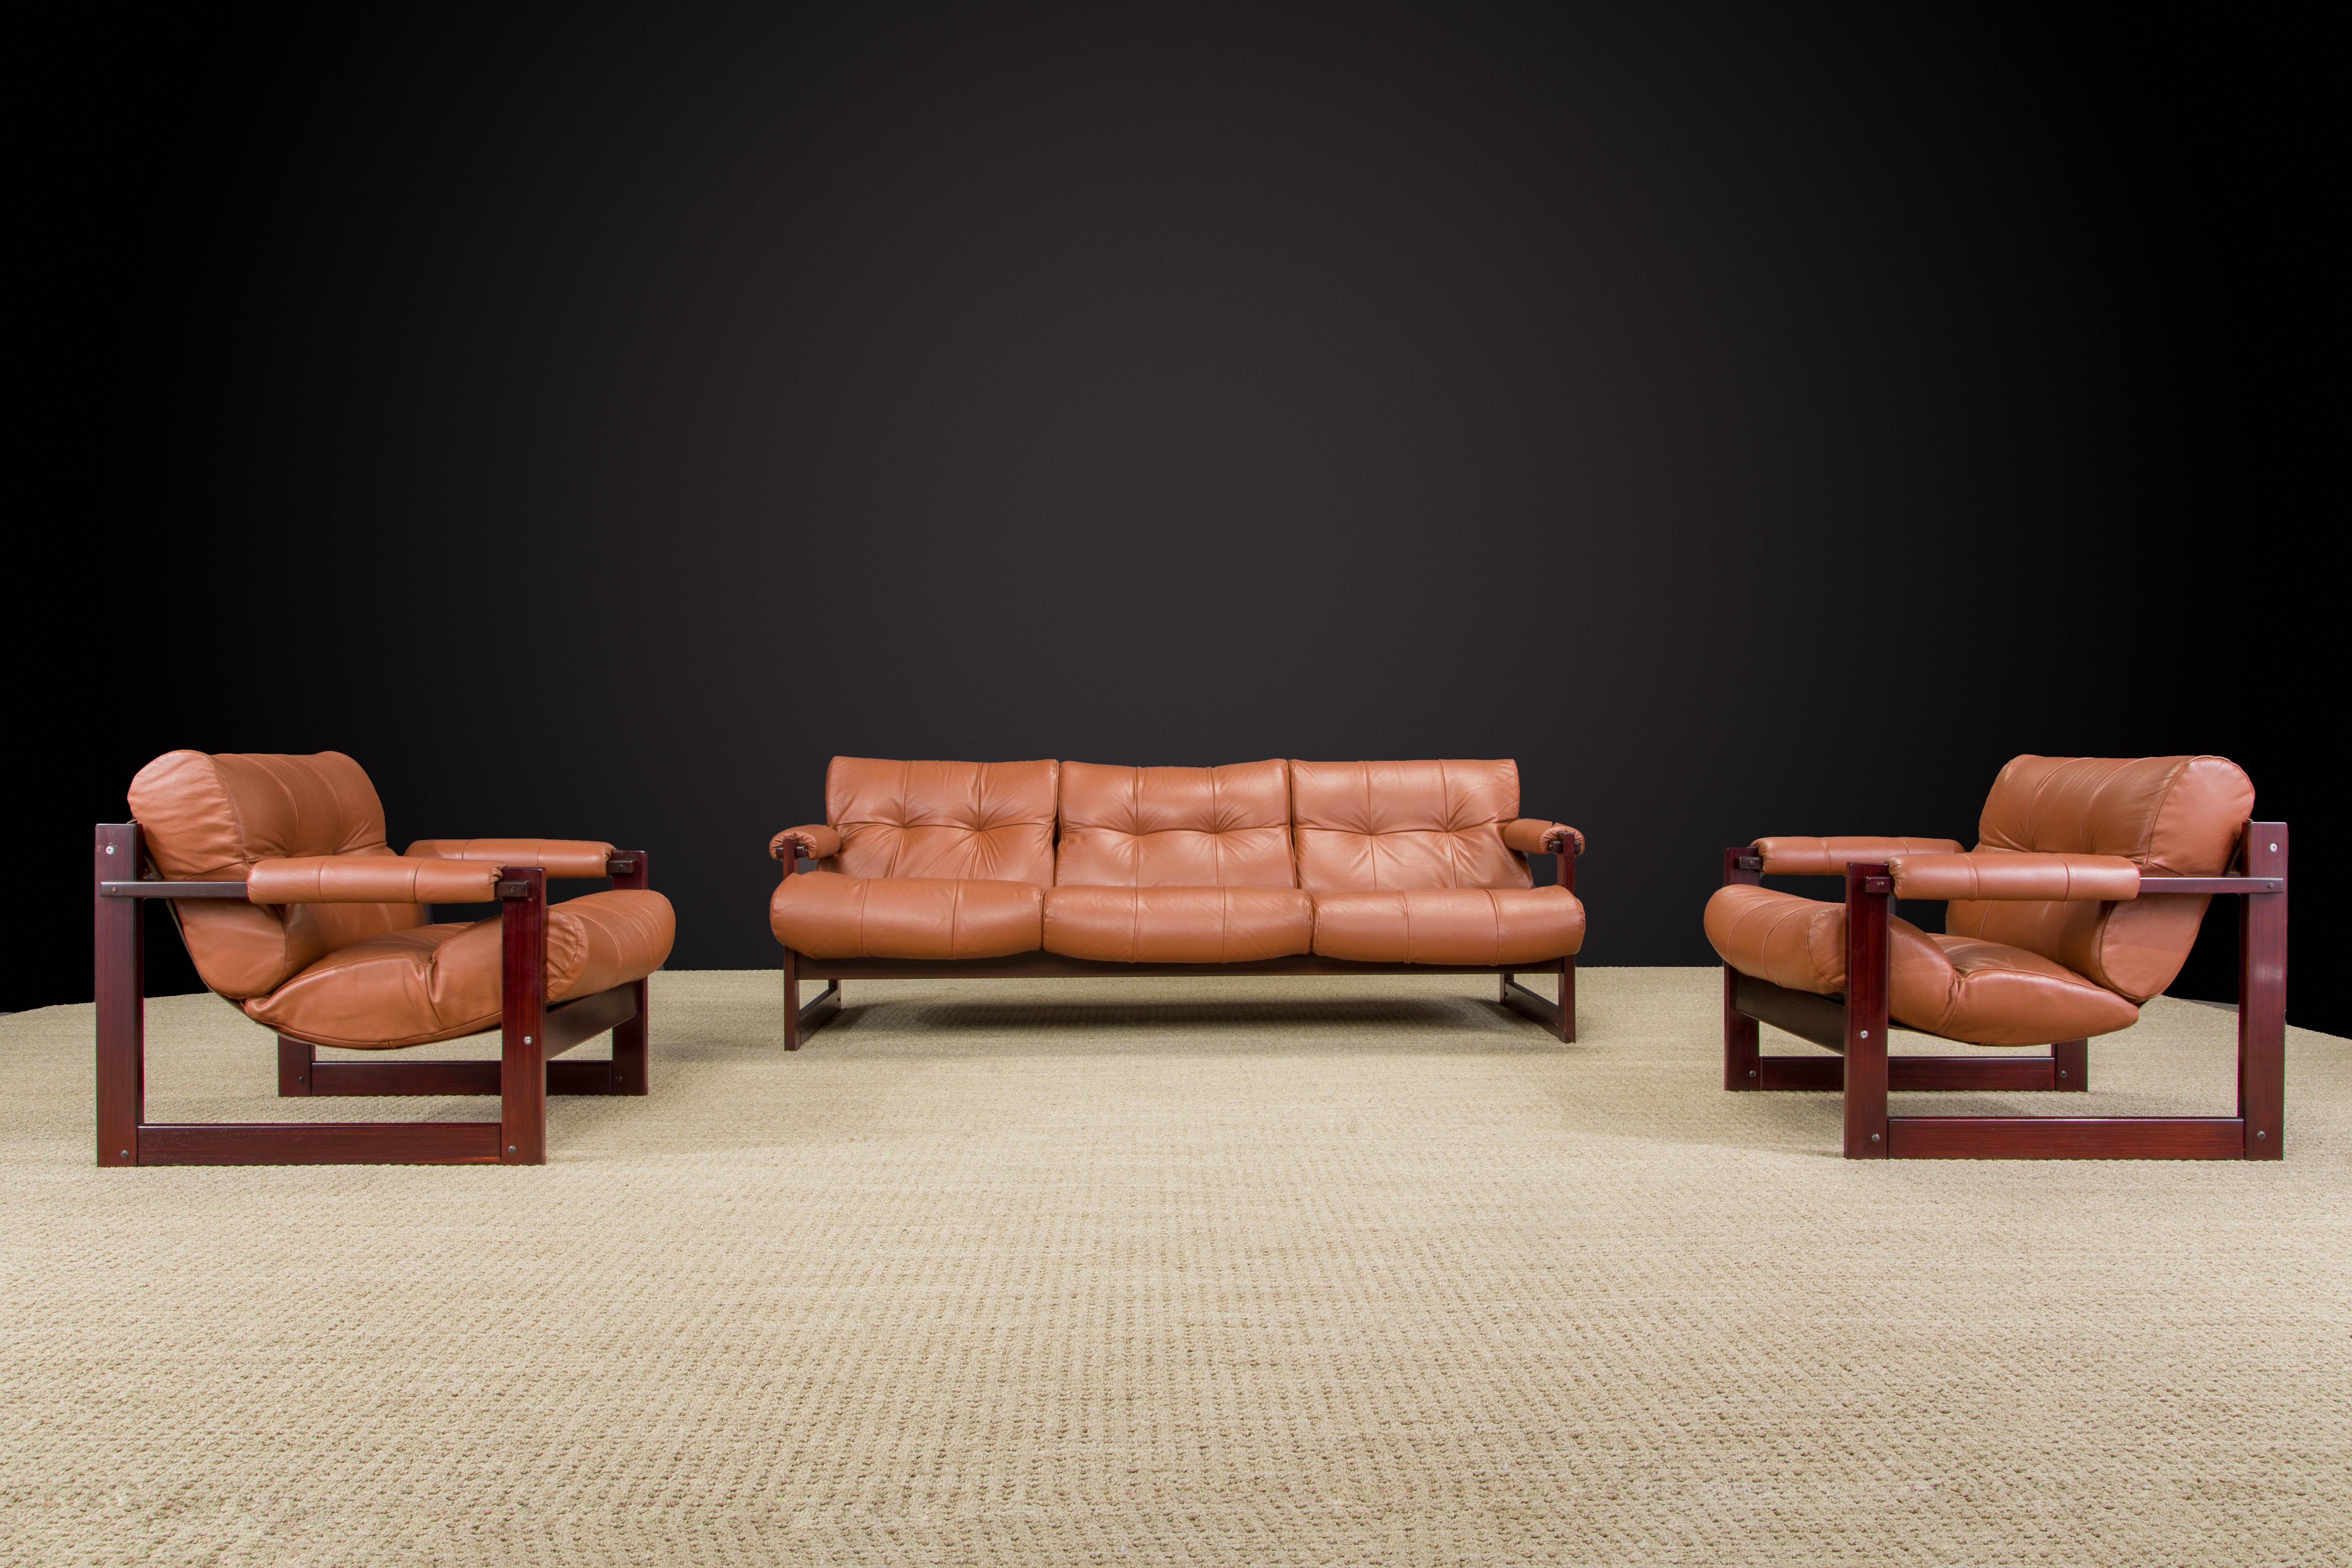 This gorgeous restored 'S-1' living room set comprised of a pair of cognac leather lounge chairs and a three-seat sofa by Brazilian designer Percival Lafer for Lafer MP.  This set was designed in 1976 and was Lafer's concept of merging Brazilian